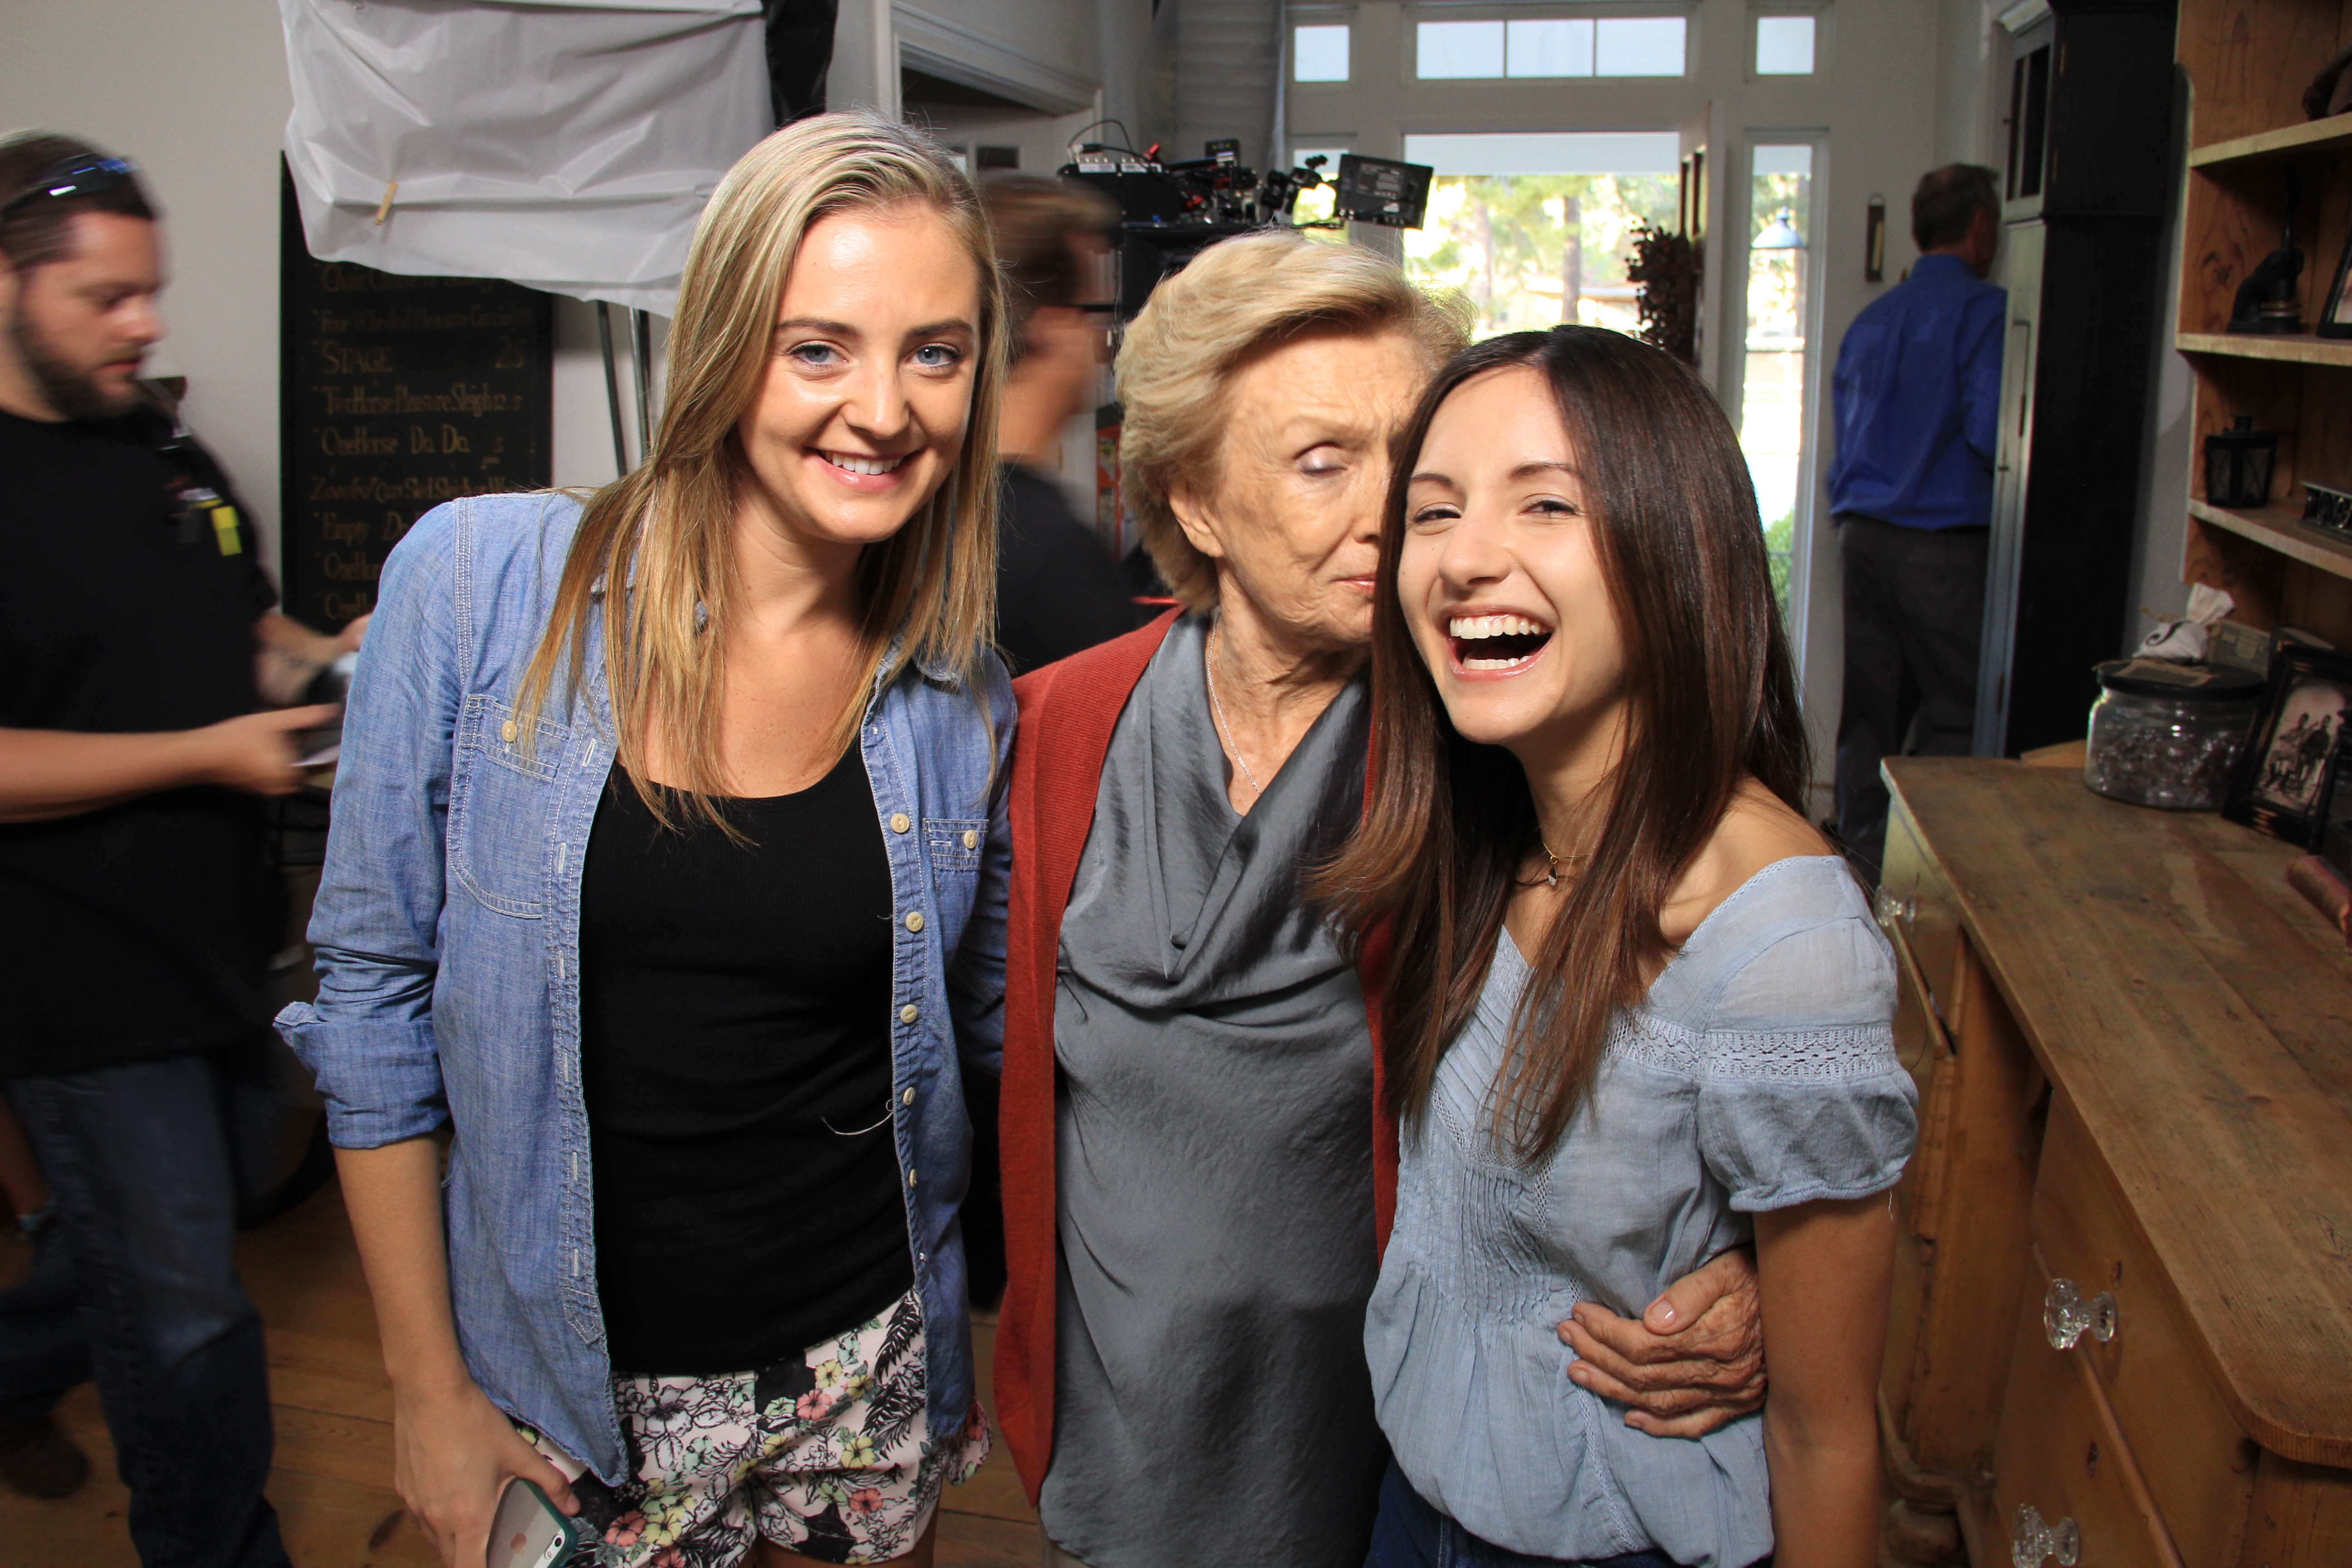 Hanging out with Cloris Leachman and Lauren J. Irwin on the set of The 11th